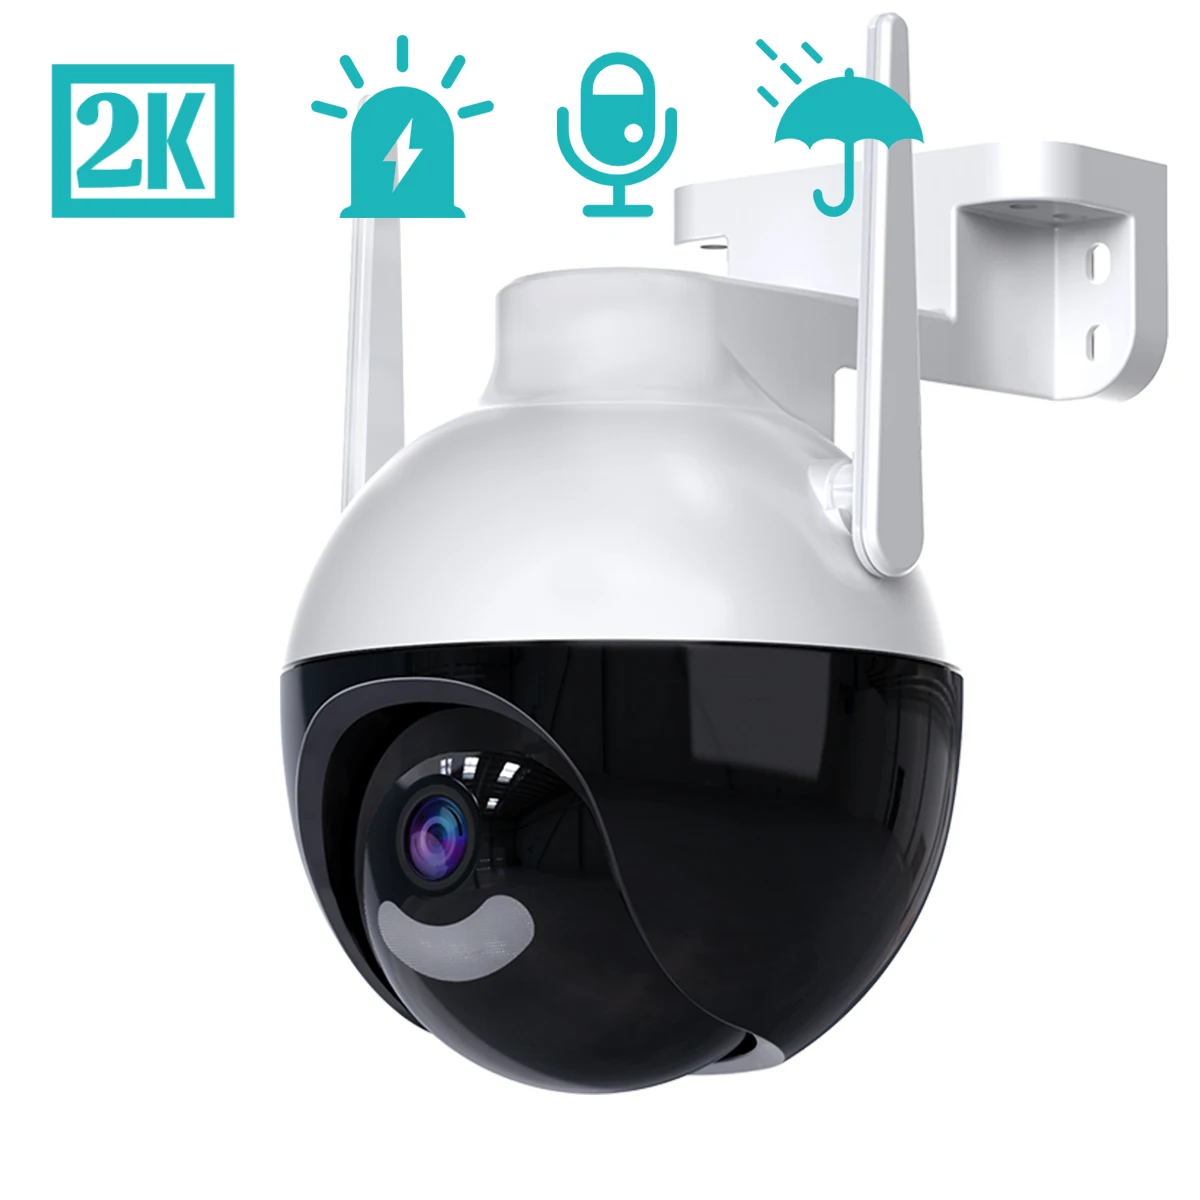 PTZ IP Camera 2K Outdoor Waterproof Wifi Camera H.265 Video Surveillance Motion Detect 4MP Auto Track CCTV Security House ICSEE